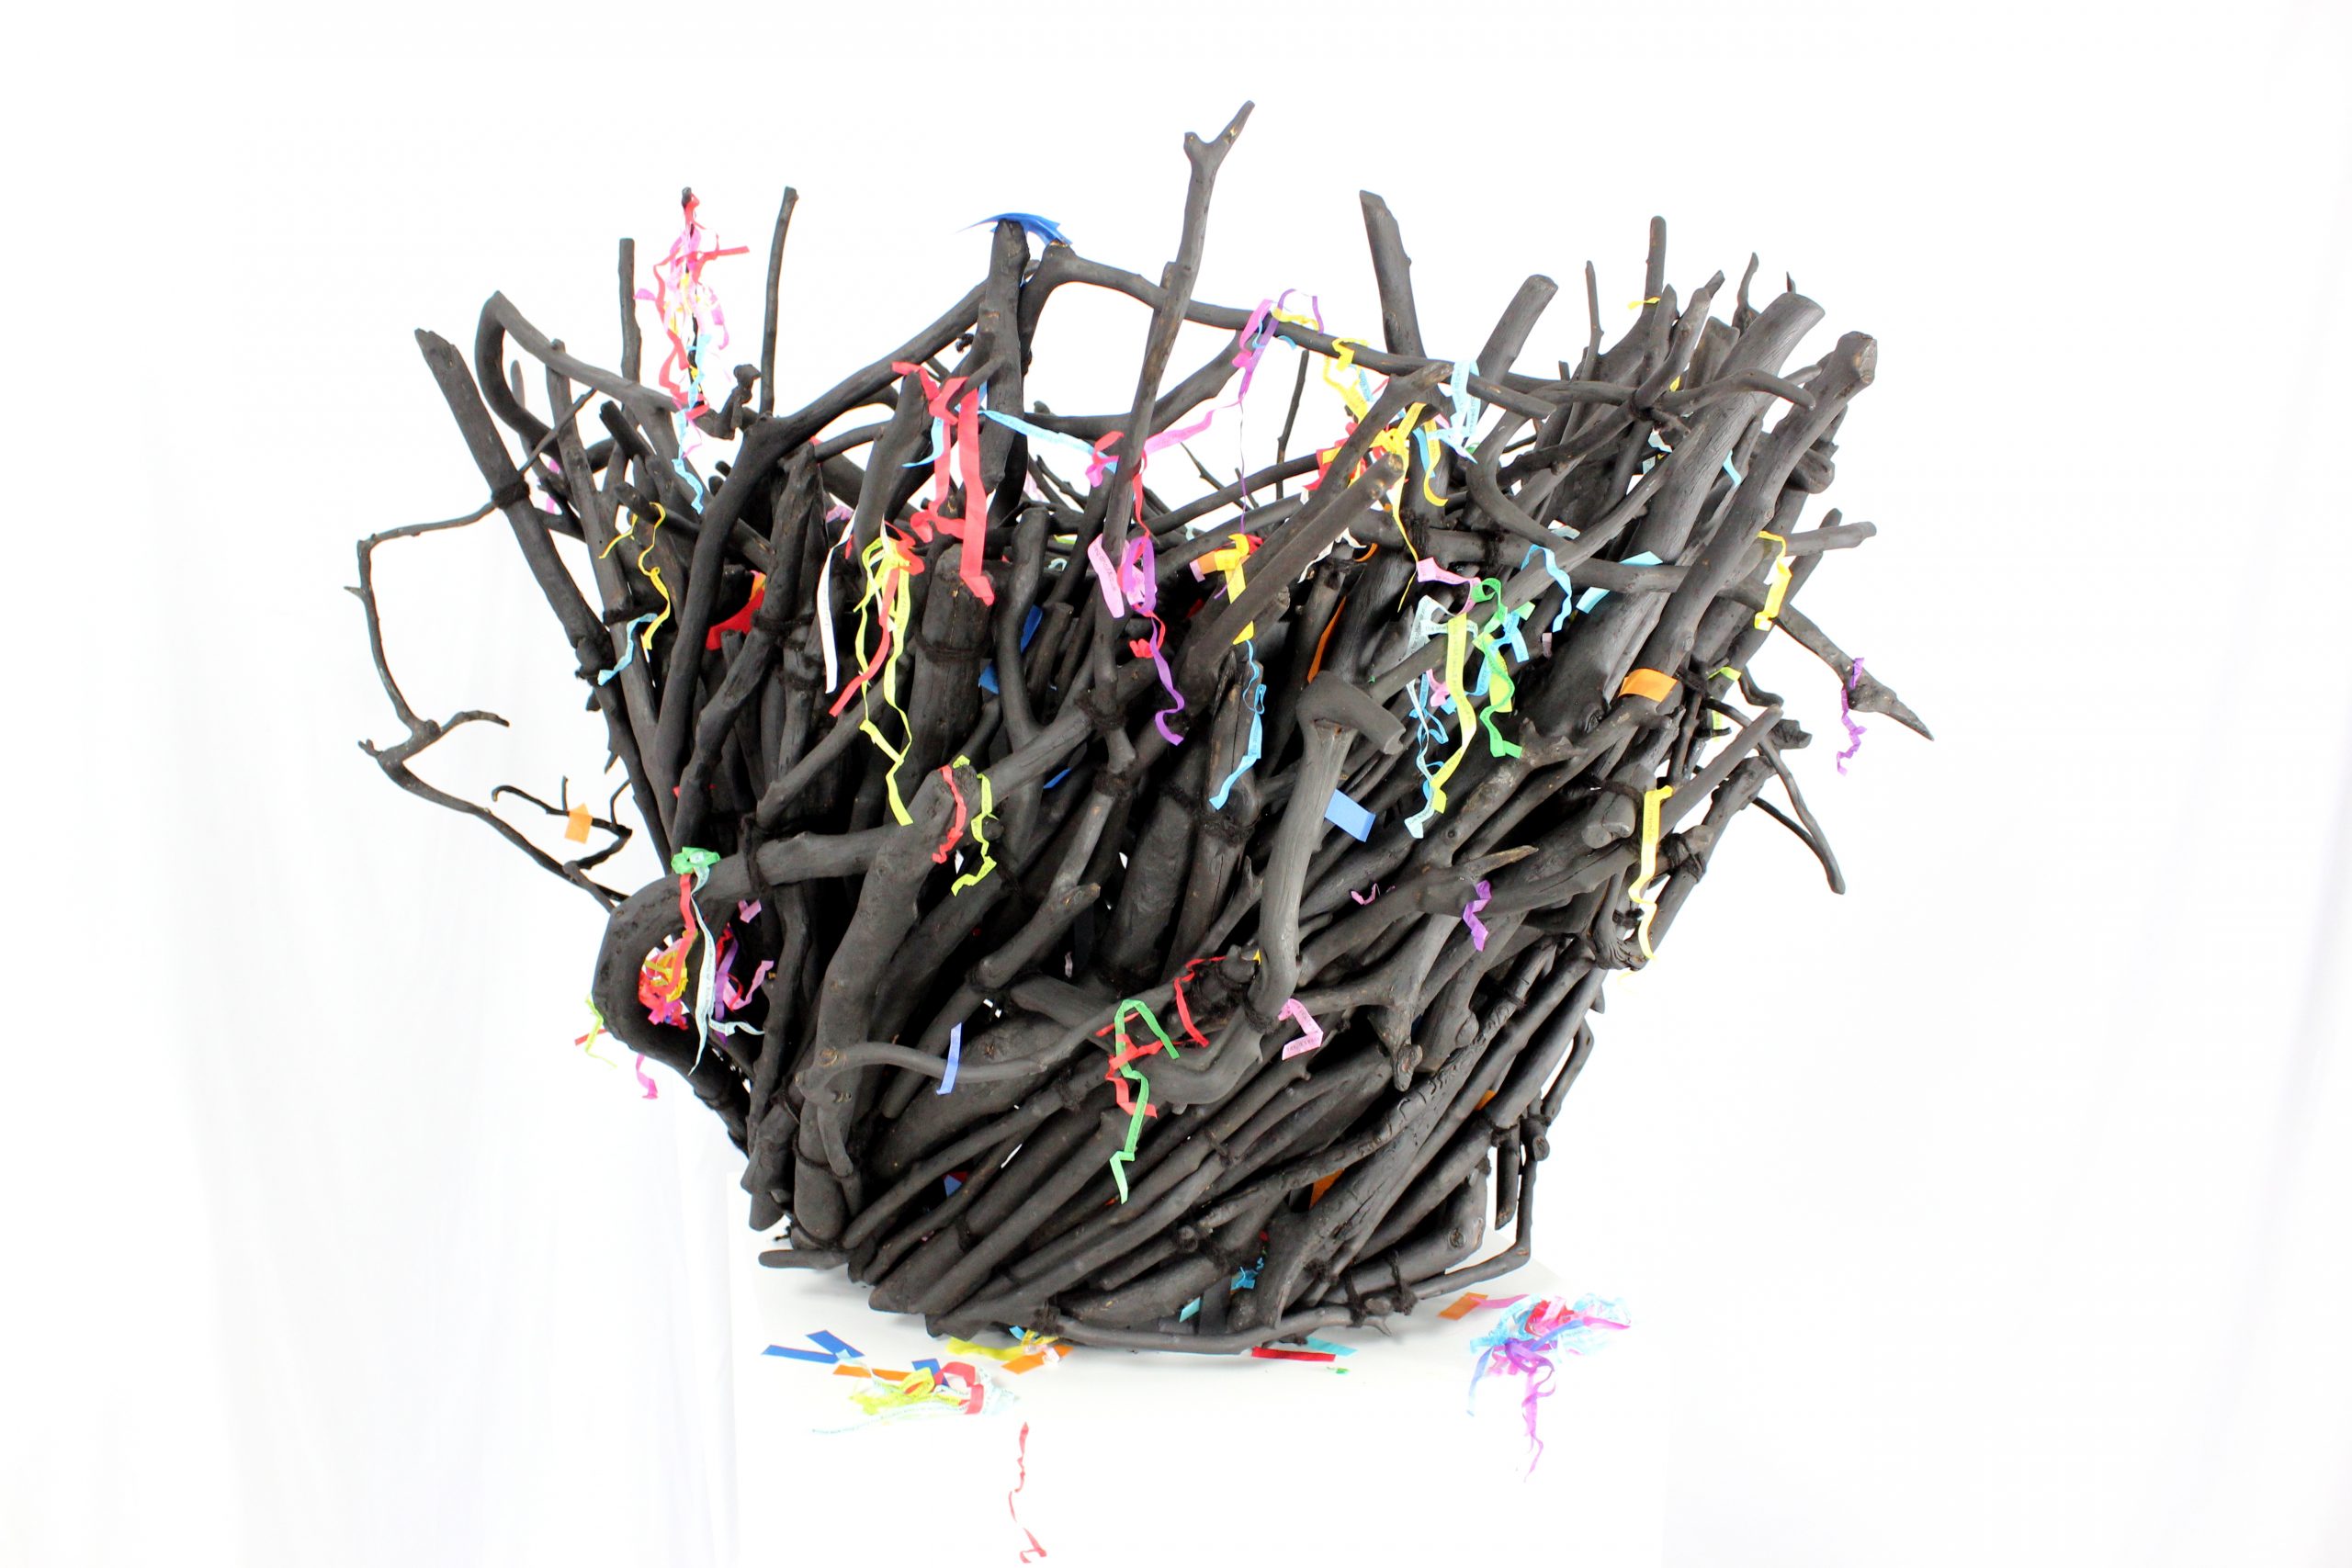 Basket woven with charred branches covered in confetti